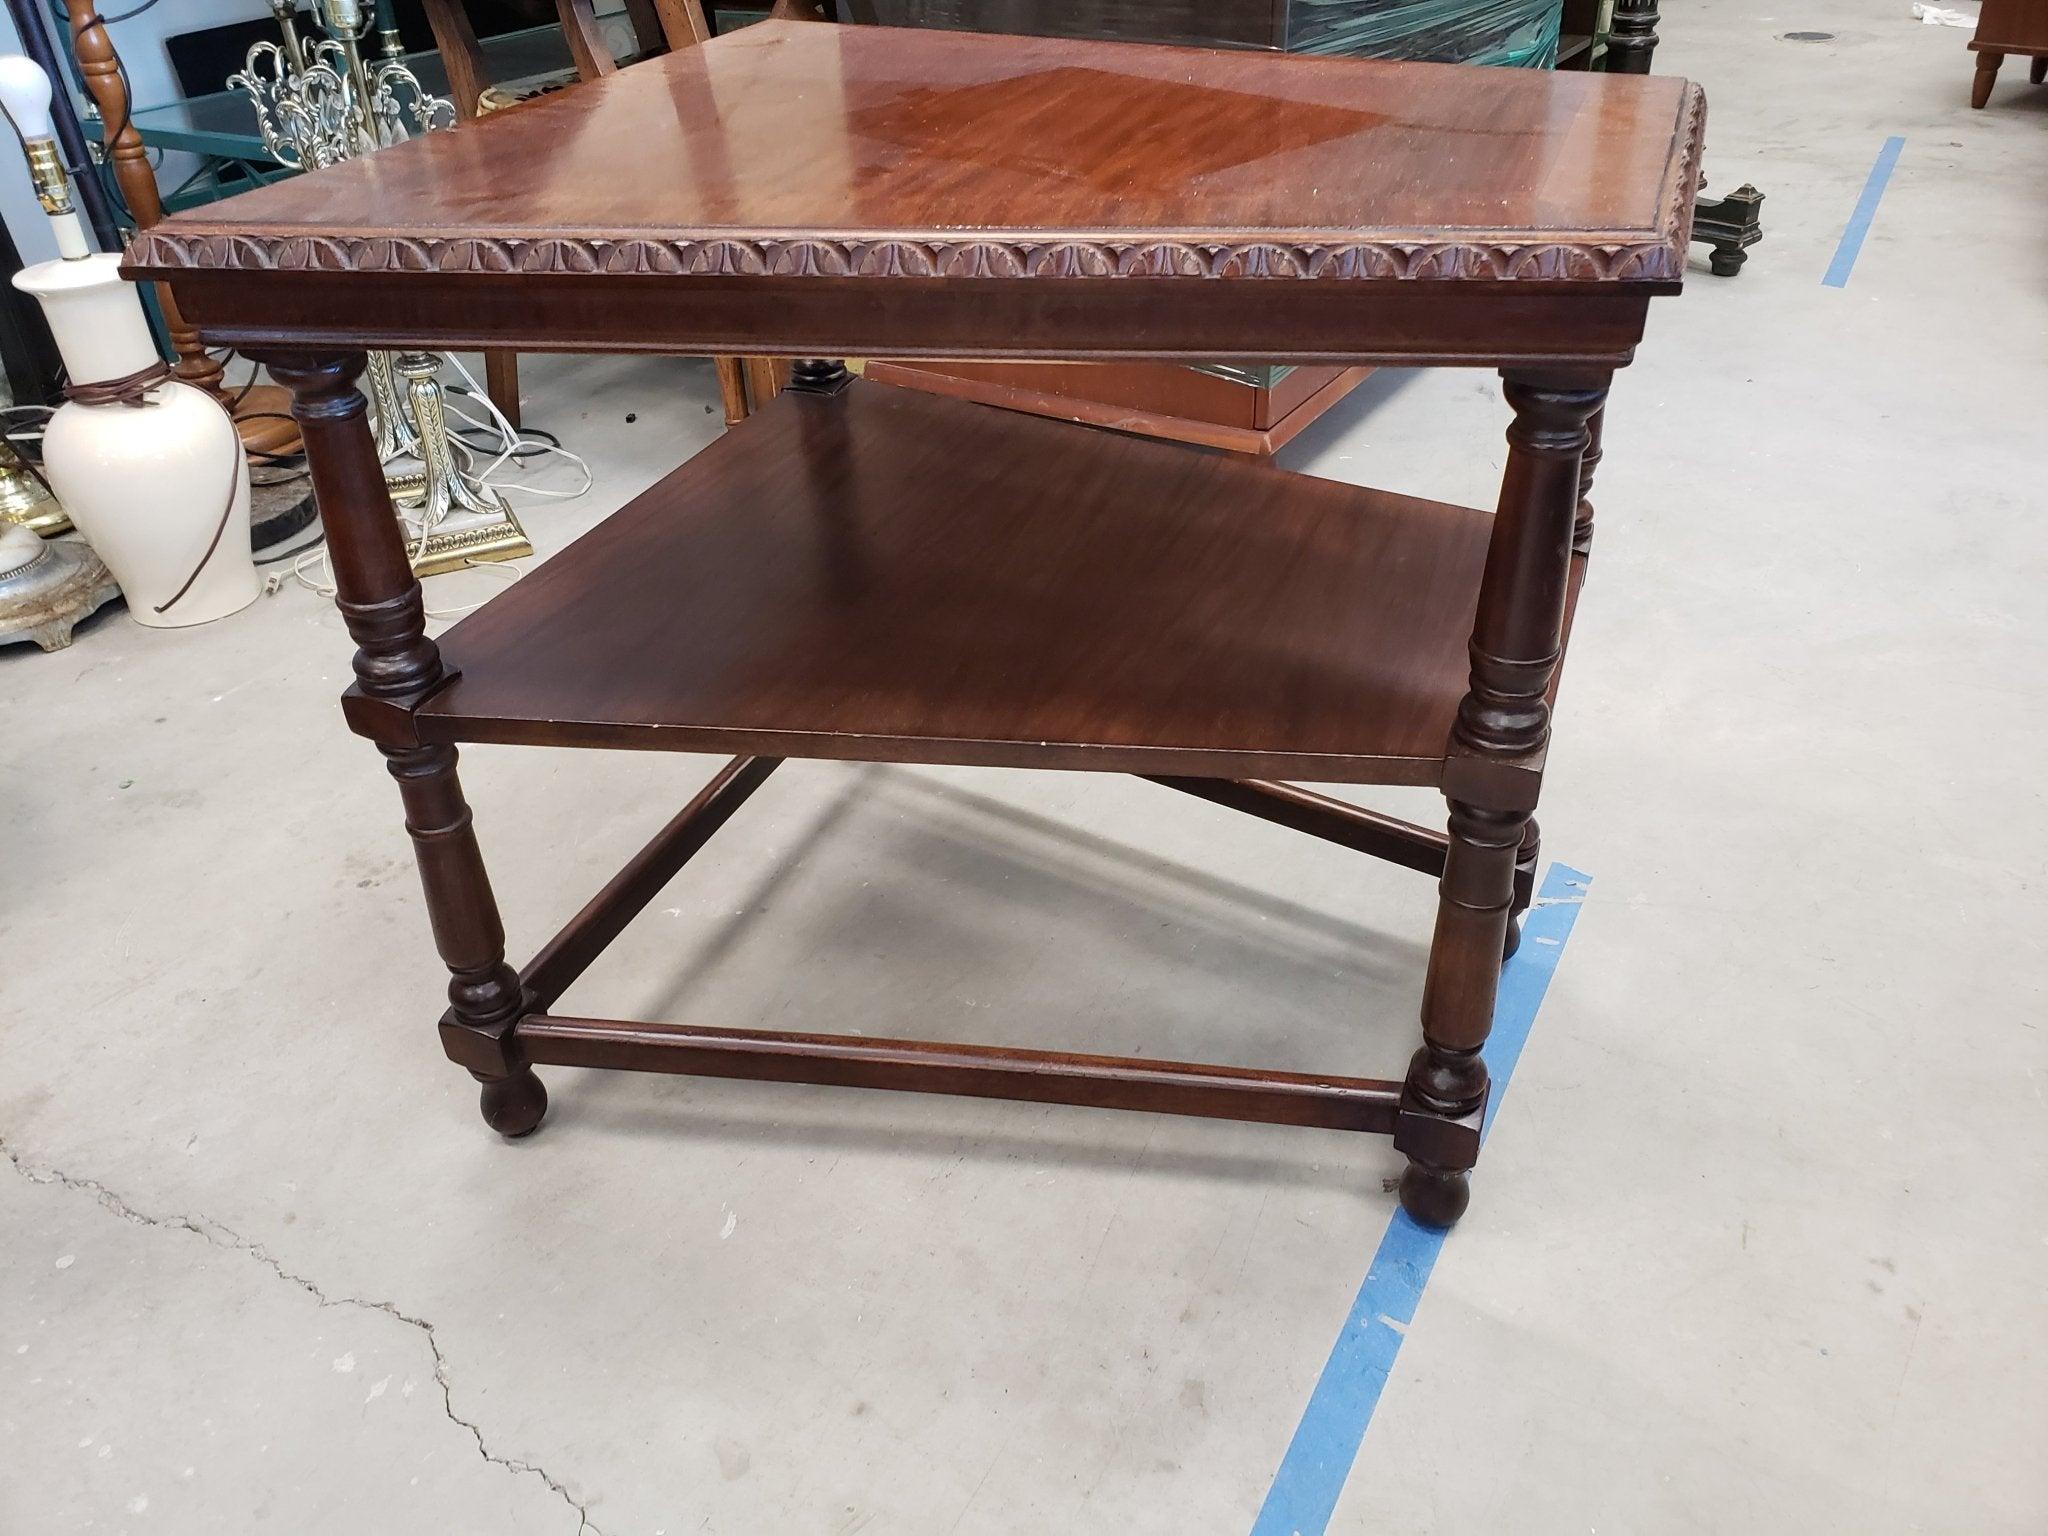 British Colonial Century Furniture Wedge Side Table For Sale